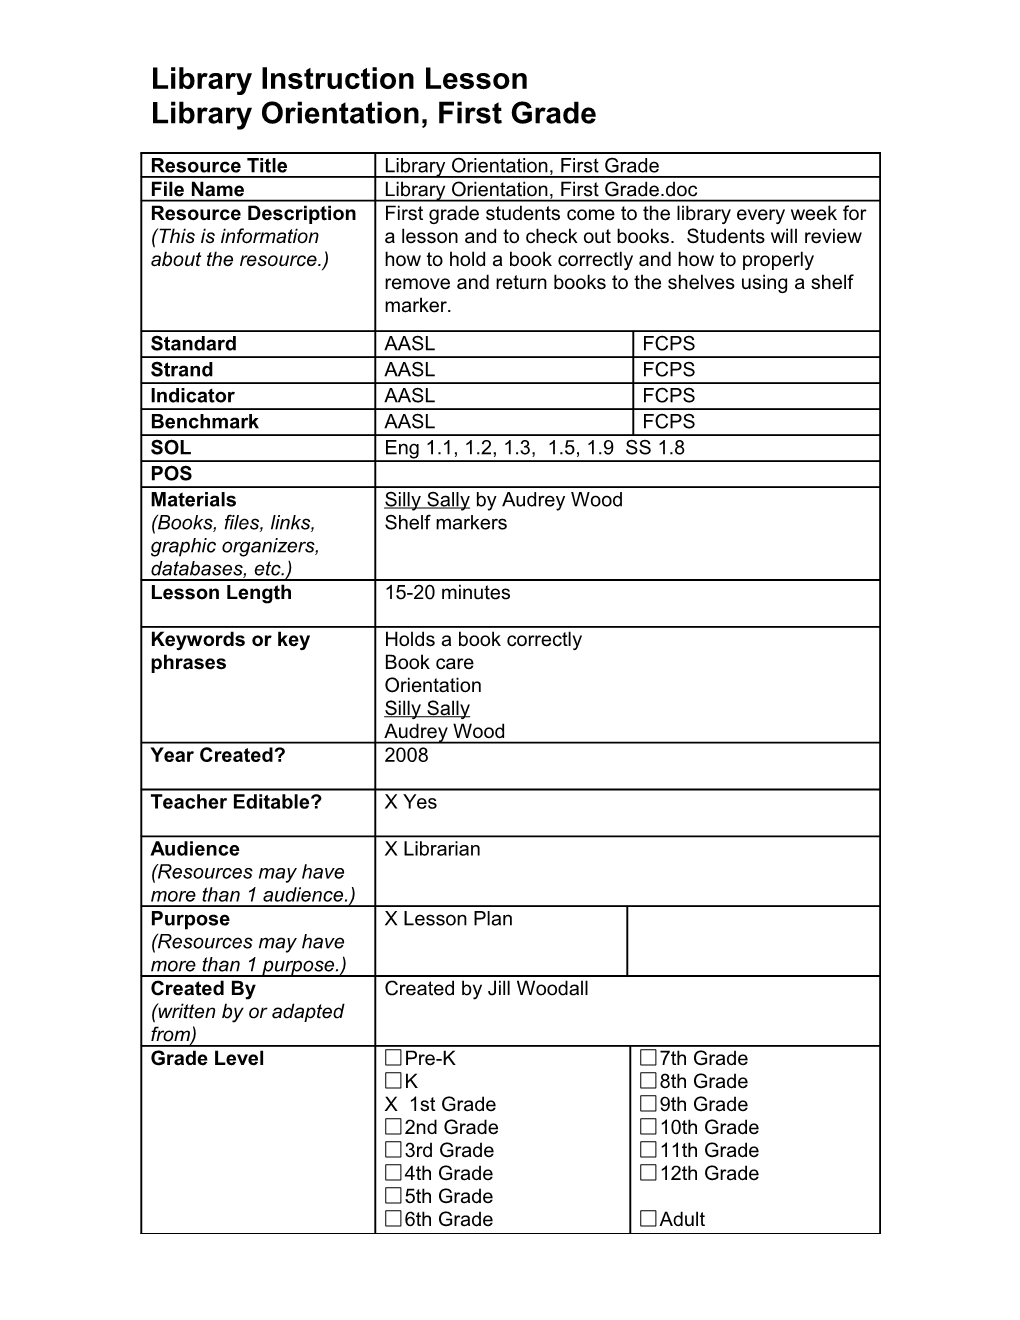 Library Instruction Lesson Database Template s1